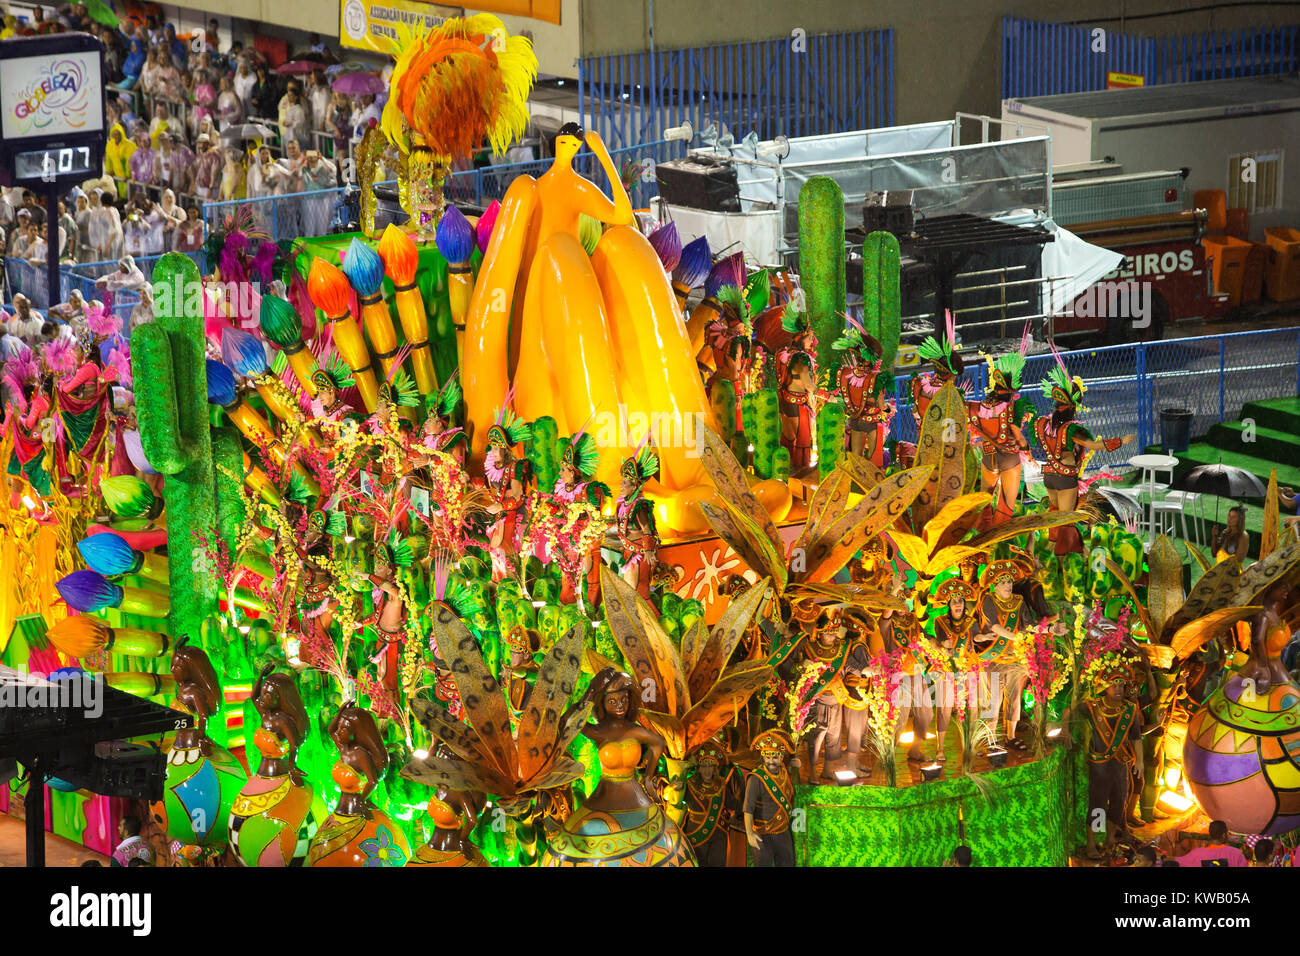 Samba school Mangueira in his presentation show at Sambodrome, Rio de Janeiro carnival. This is one of the most waited big event in town, Brazil Stock Photo